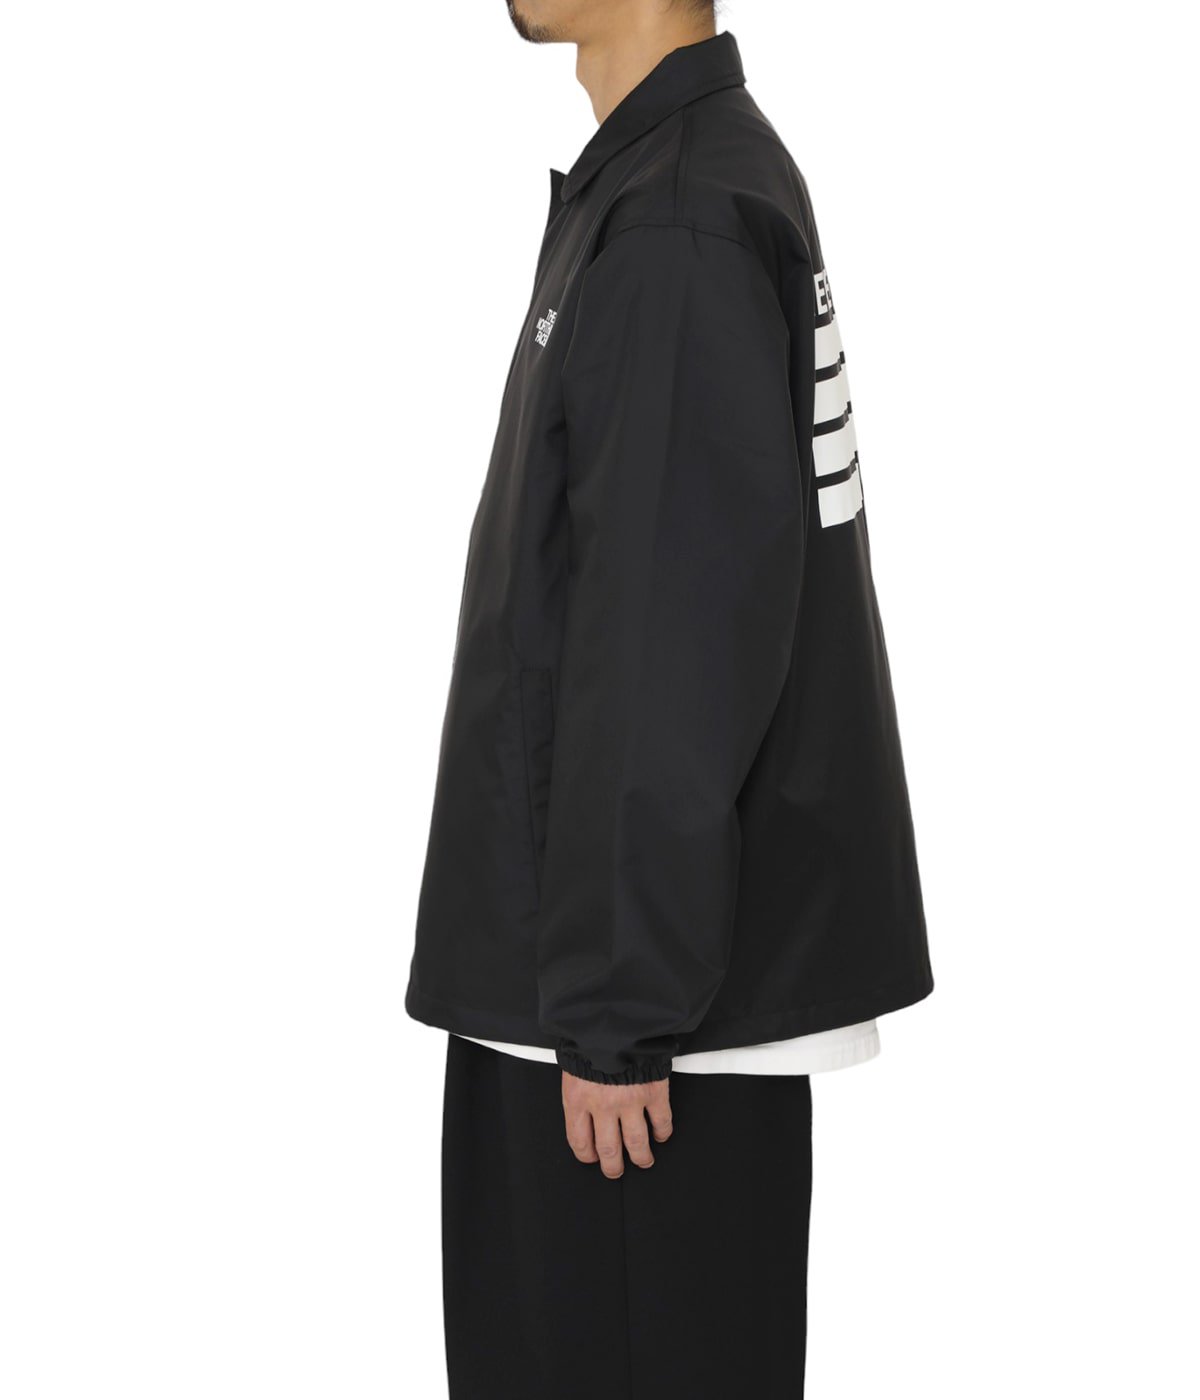 NEVER STOP ING The Coach Jacket | THE NORTH FACE(ザ ノースフェイス 